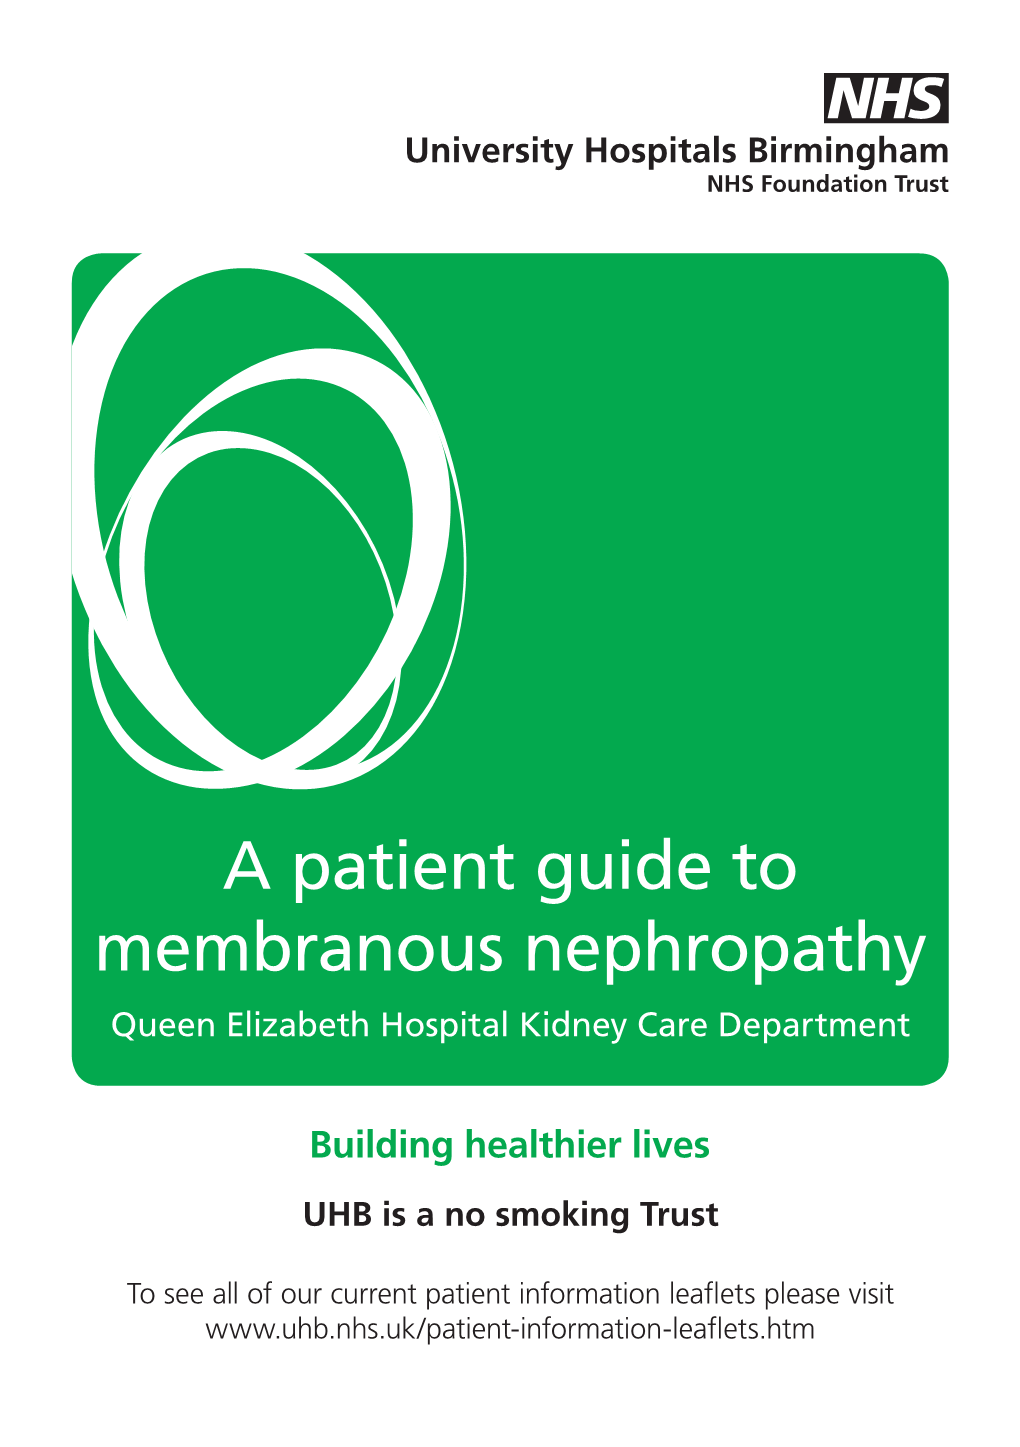 A Patient Guide to Membranous Nephropathy Queen Elizabeth Hospital Kidney Care Department